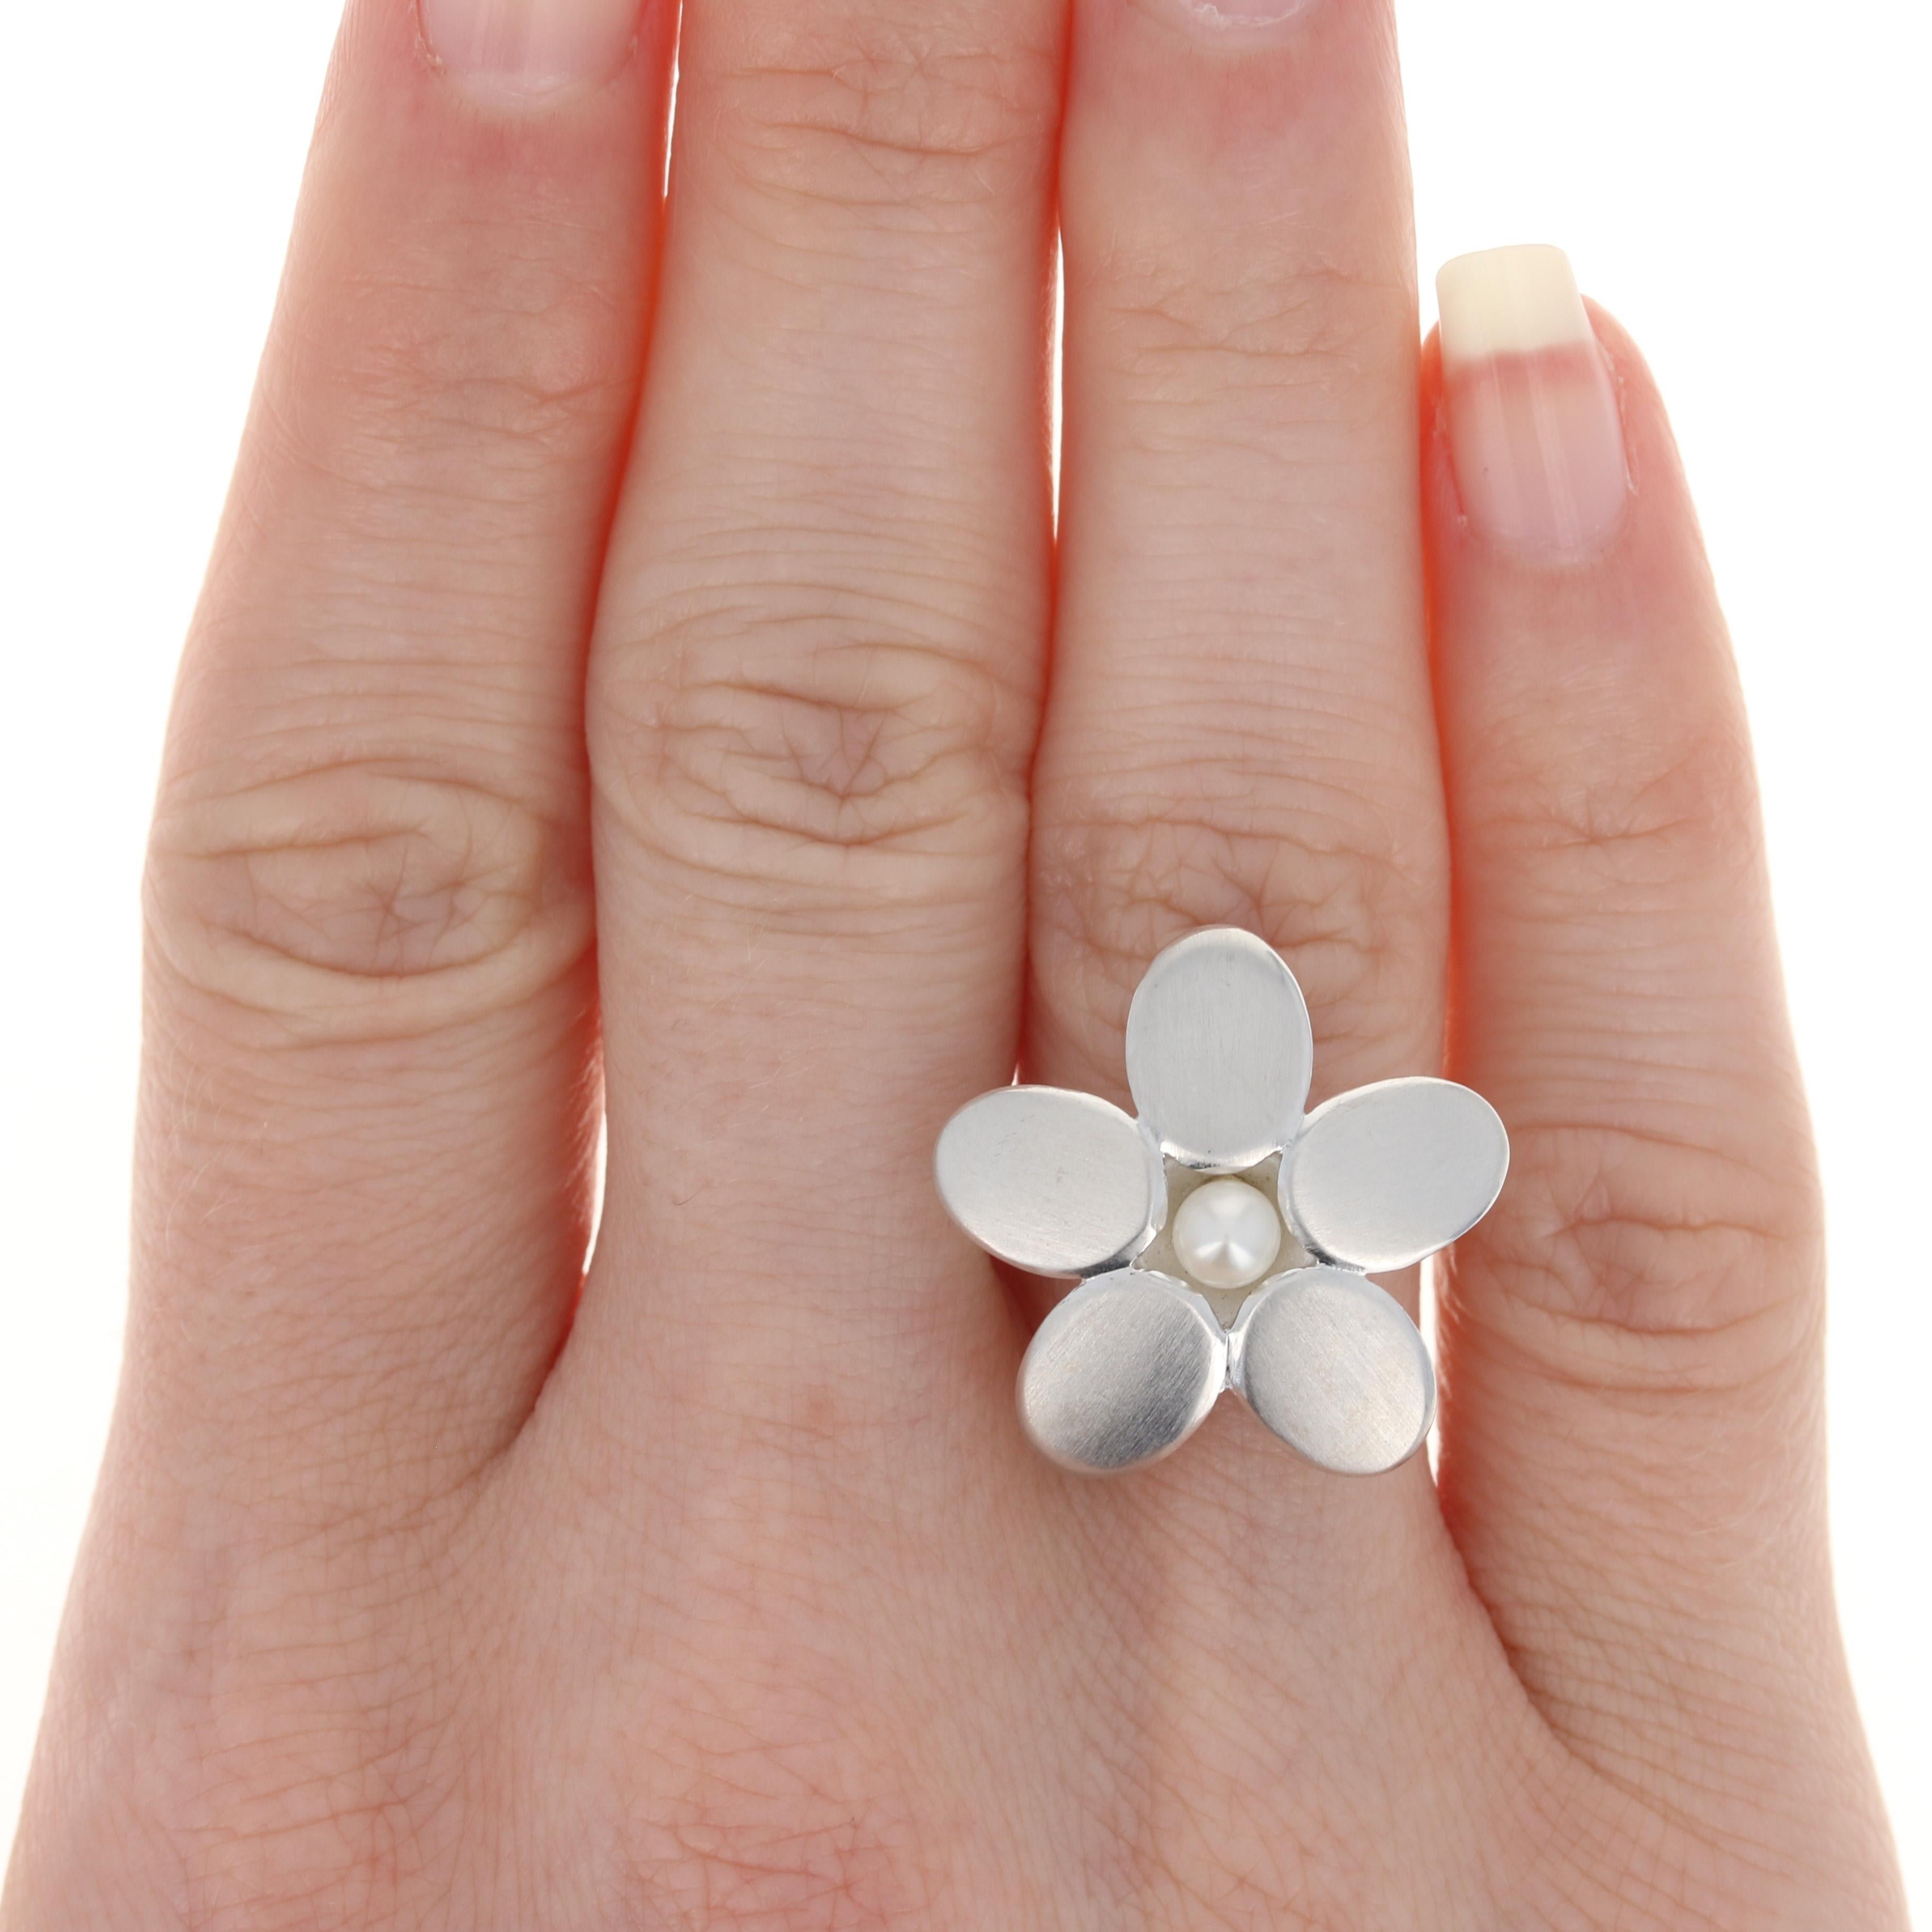 This ring retails at $135
This ring is a size 7 1/2. Please contact for additional sizing options.
Metal Content: Sterling Silver
Finish:Satin - Brushed
Stone: Freshwater Pearl
Face Height (north to south): 7/8